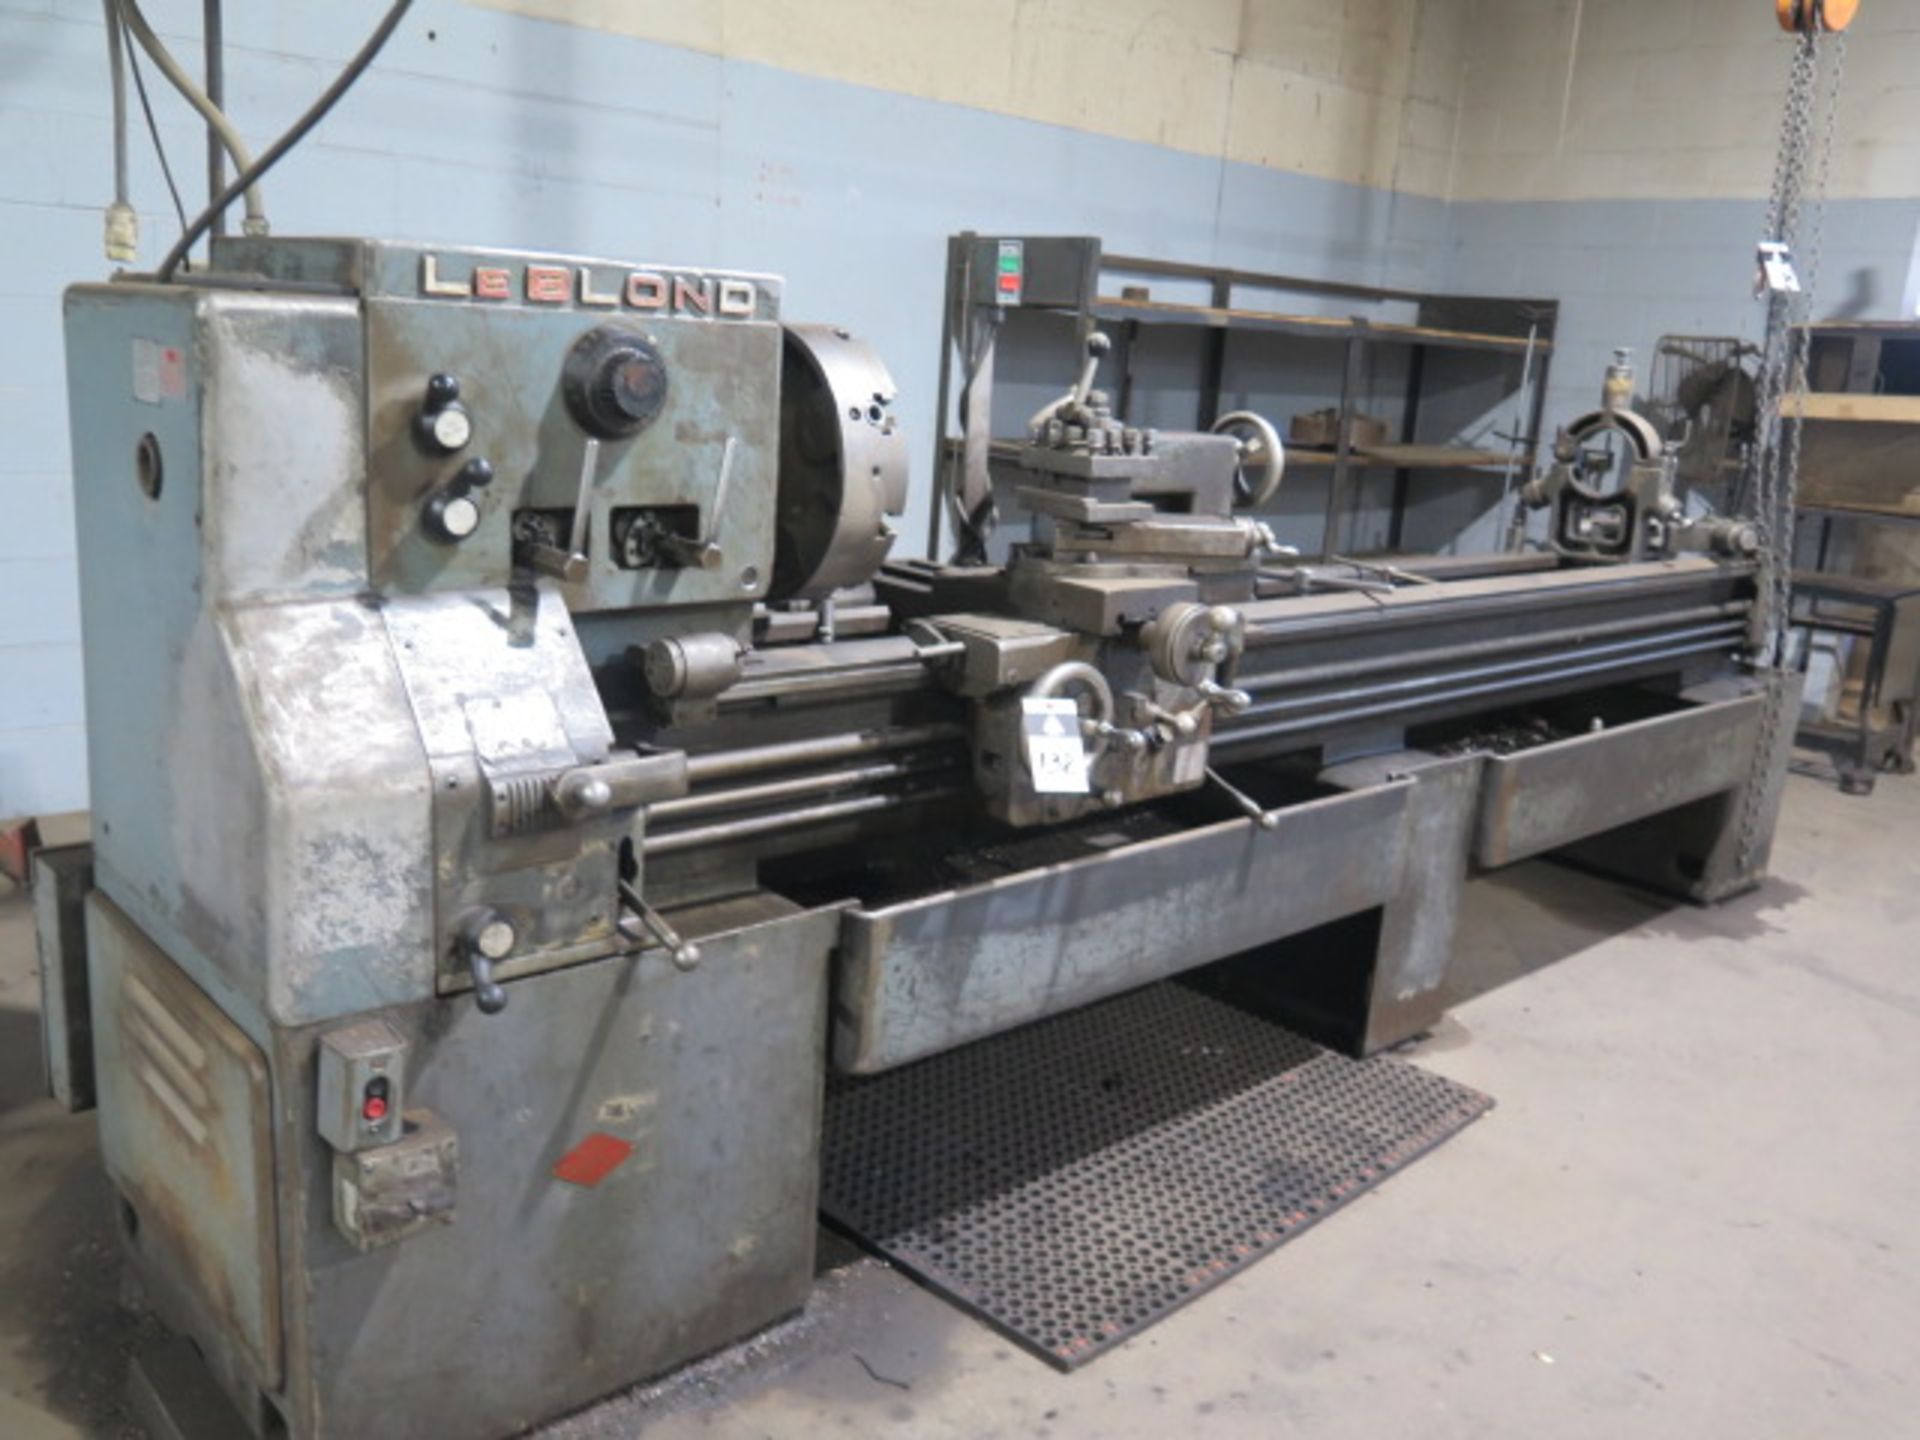 LeBlond 19” x 106” Lathe w/ 25-1000 Dial Change RPM, Inch Threading, Tailstock, (2) Steady Rests, - Image 2 of 11